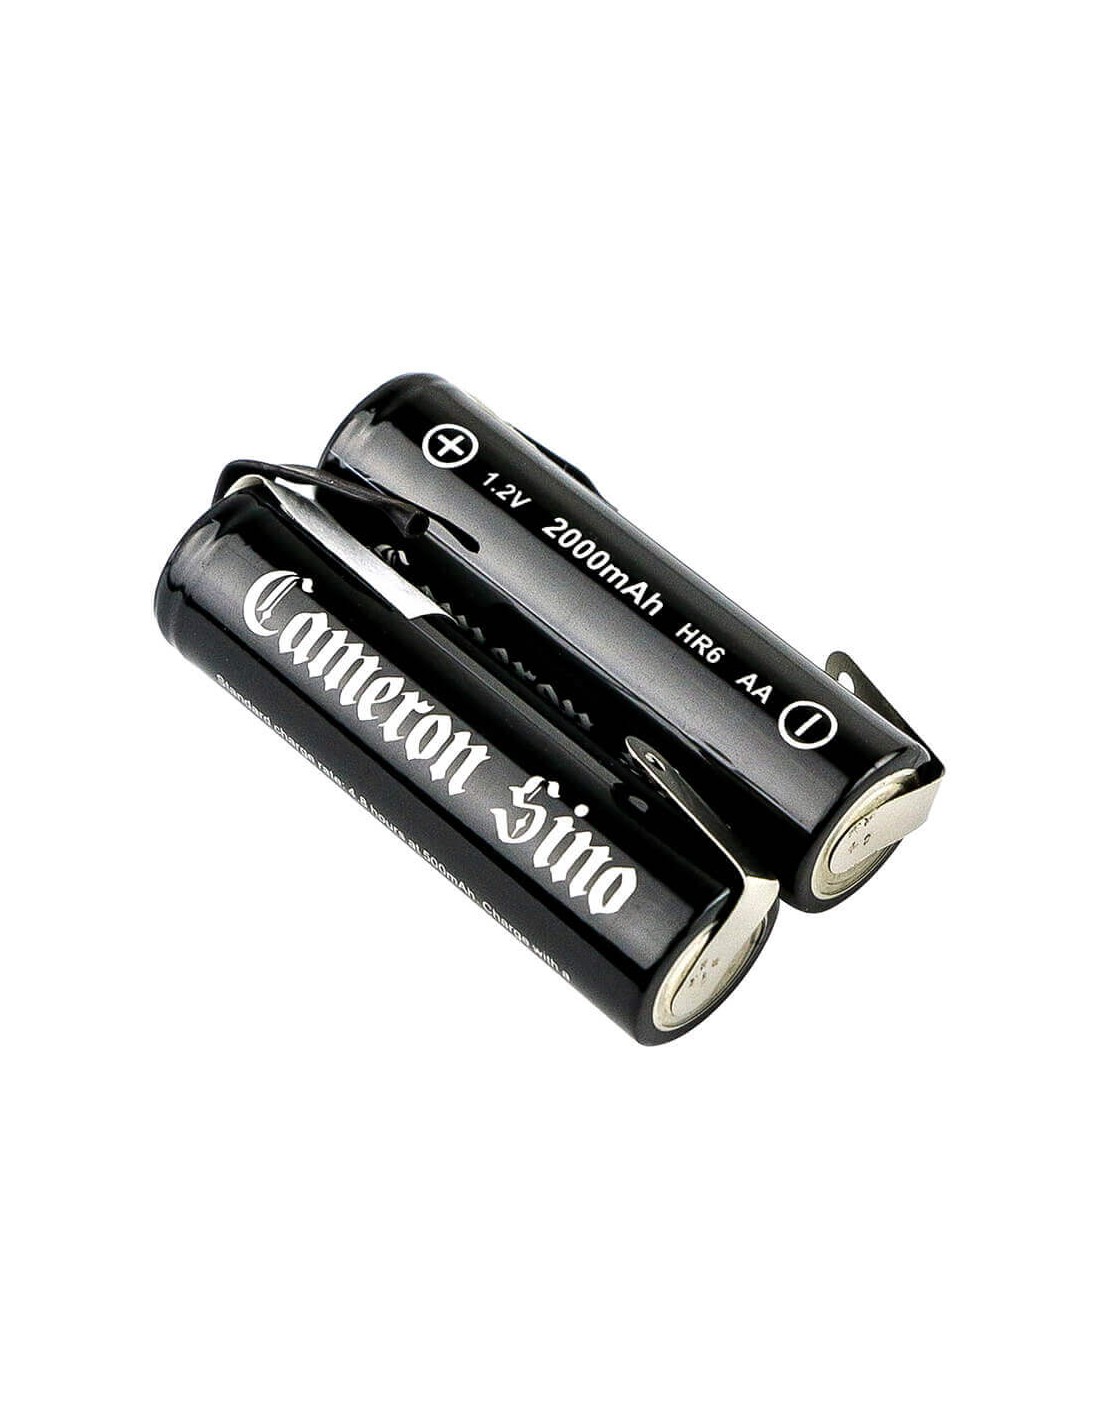 Two Batteris for Aa Aa, Am3, E91 with solder tabs 1.2V, 2000mAh - 2.40Wh